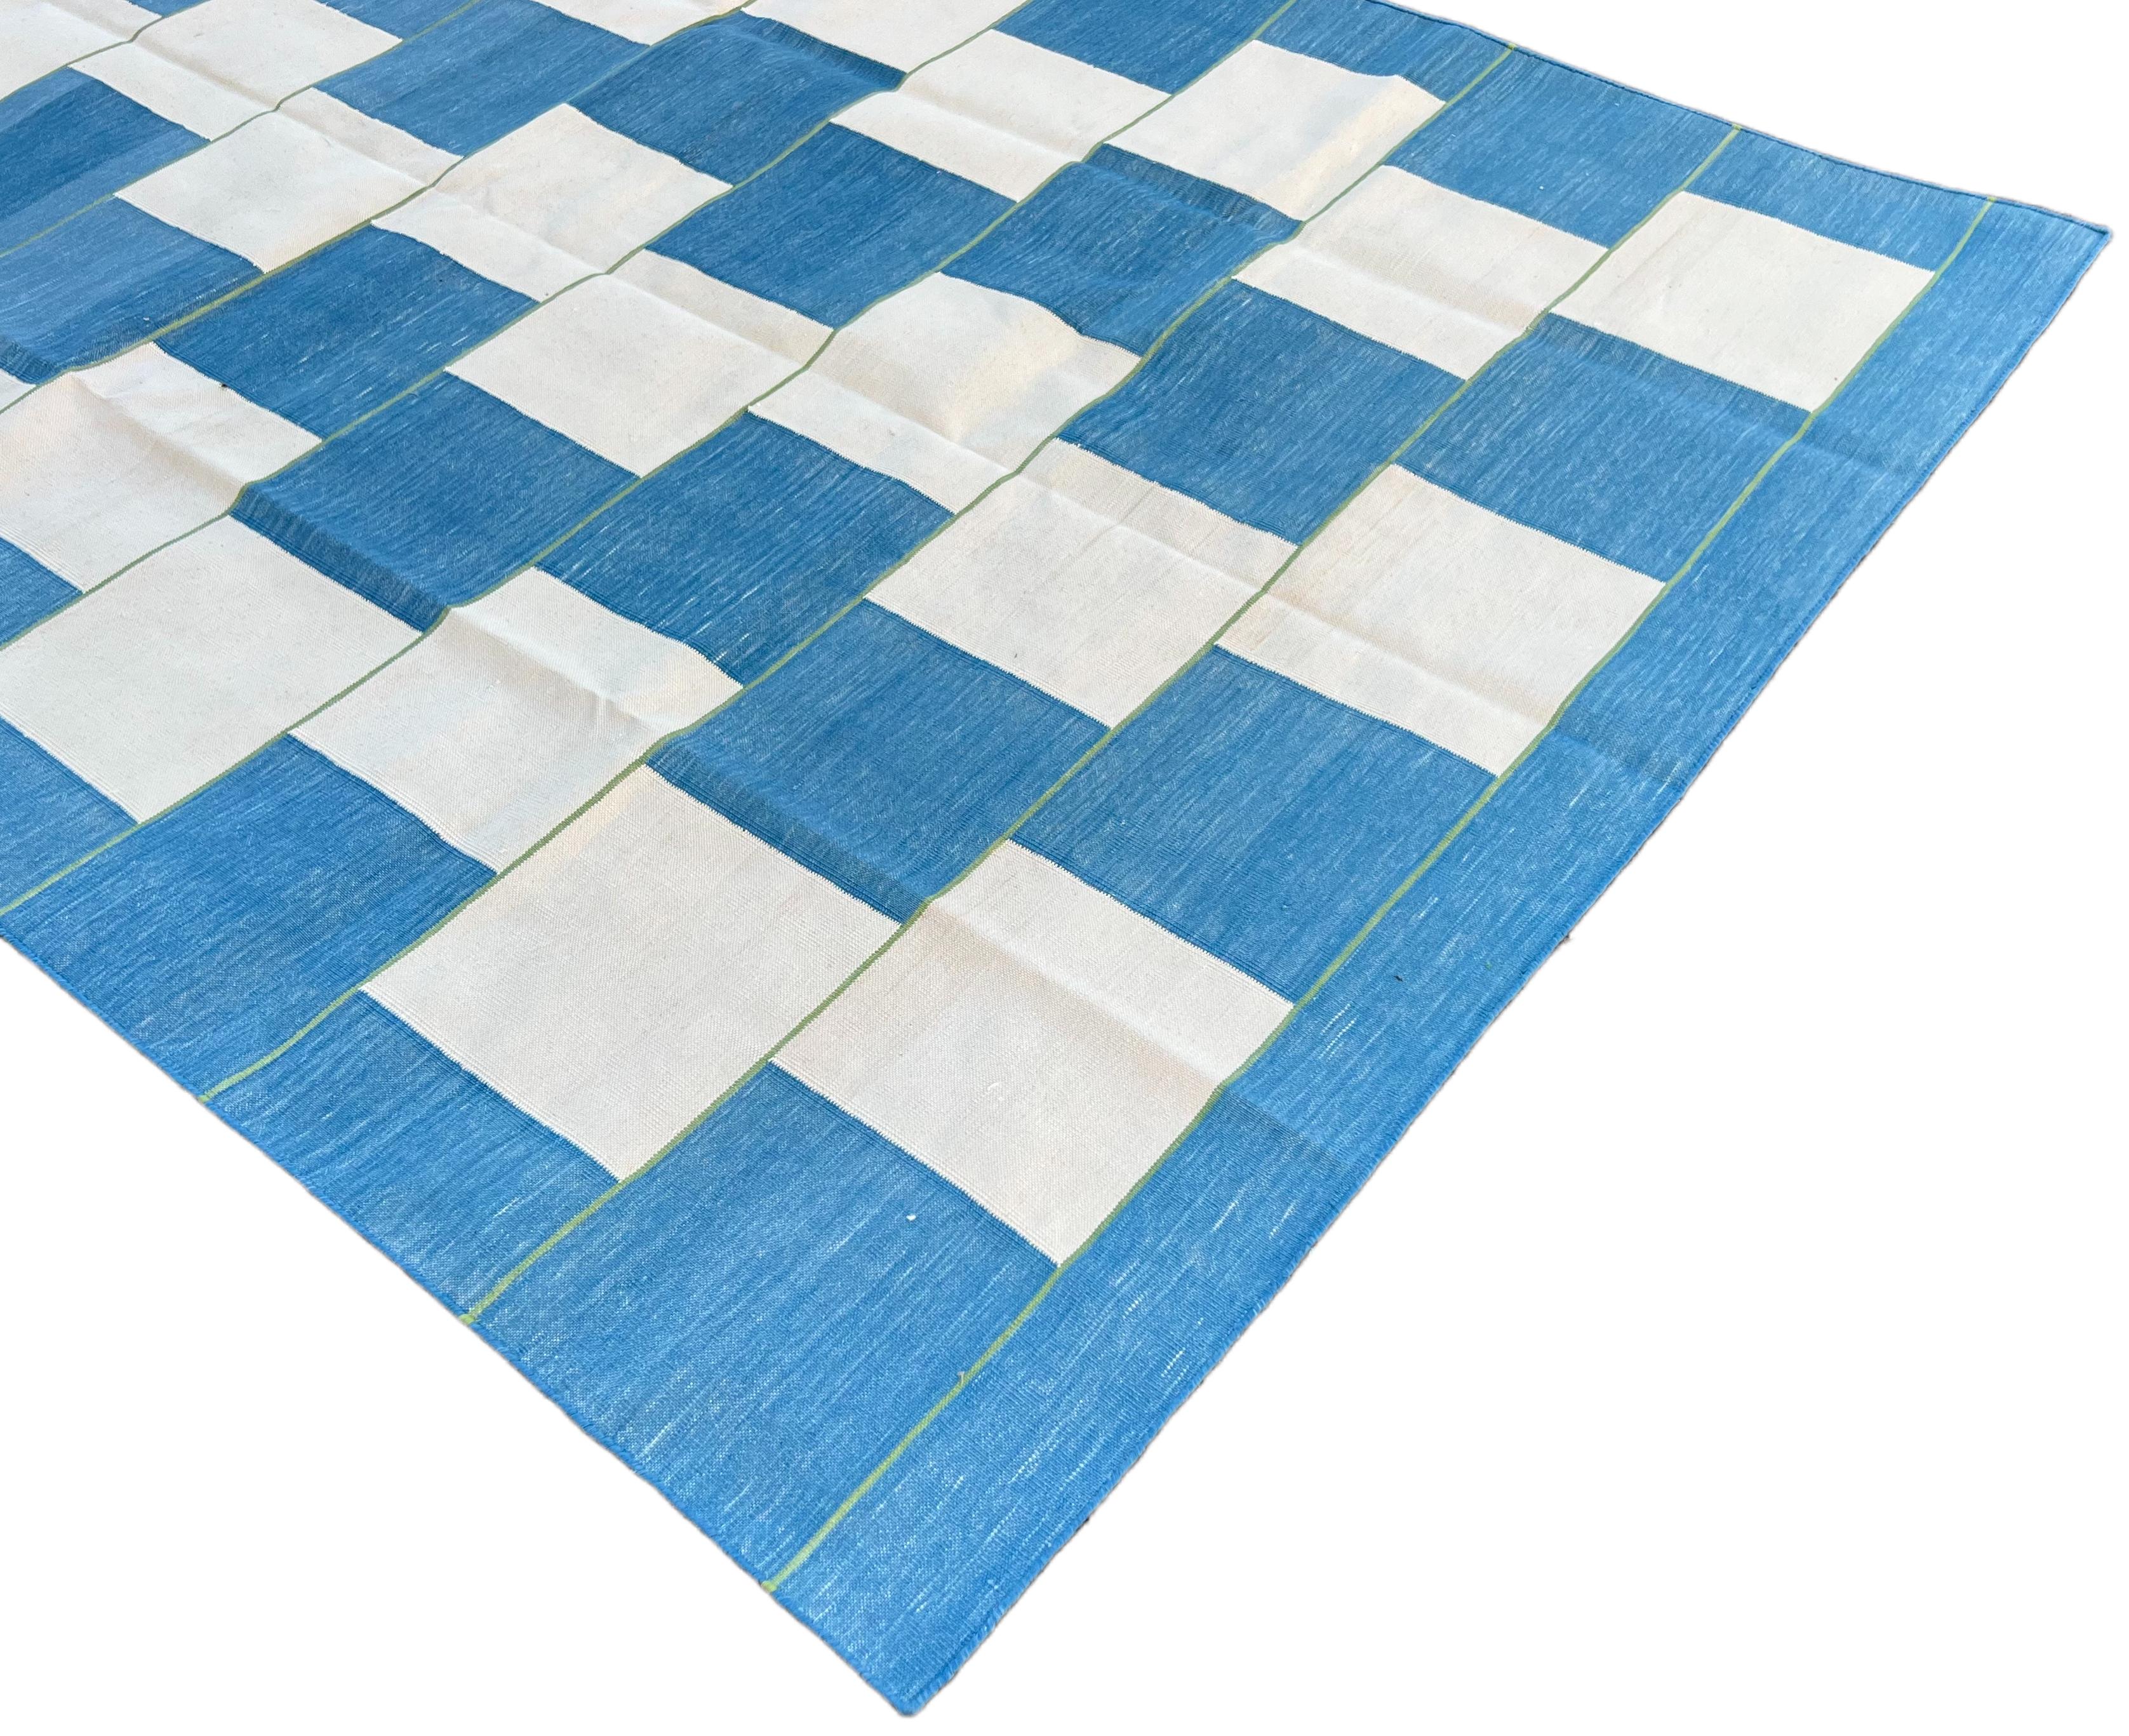 Mid-Century Modern Handmade Cotton Area Flat Weave Rug, 5x8 Blue And White Checked Indian Dhurrie For Sale